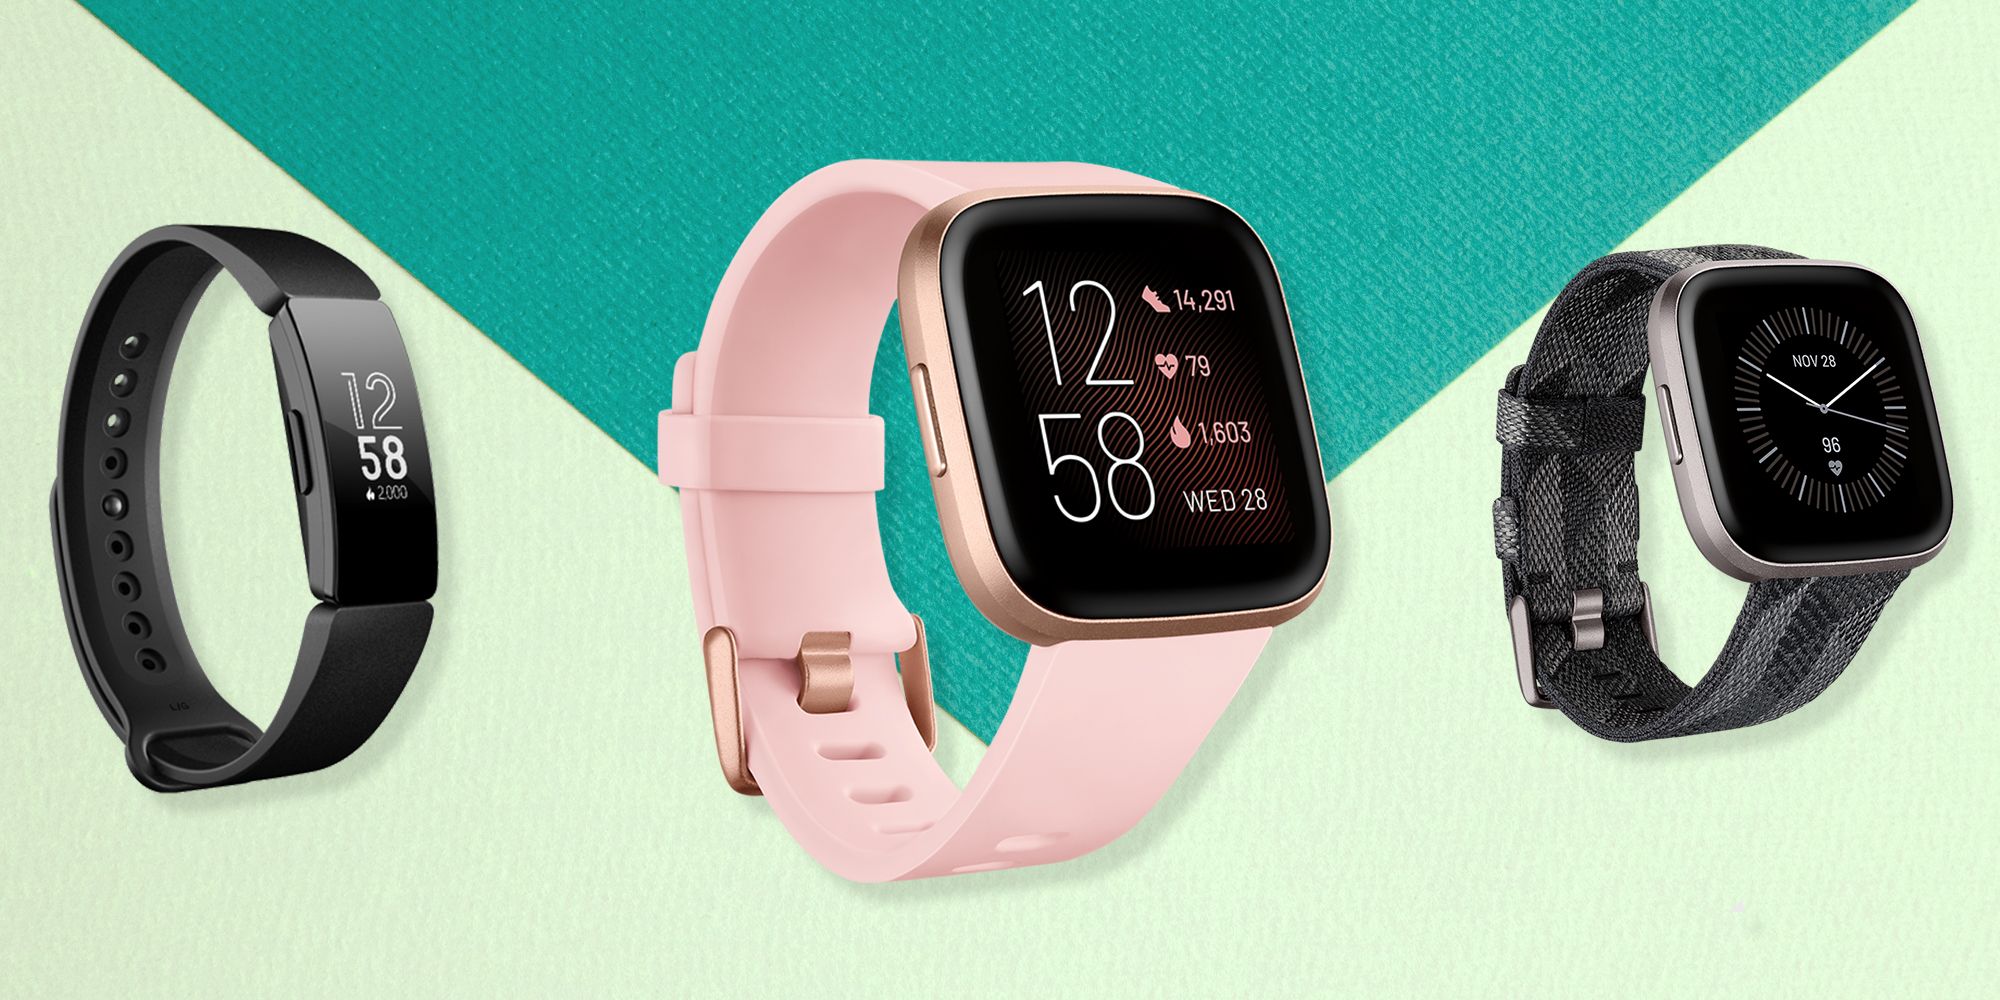 FitBit Black Friday Sale 2019 - Early 